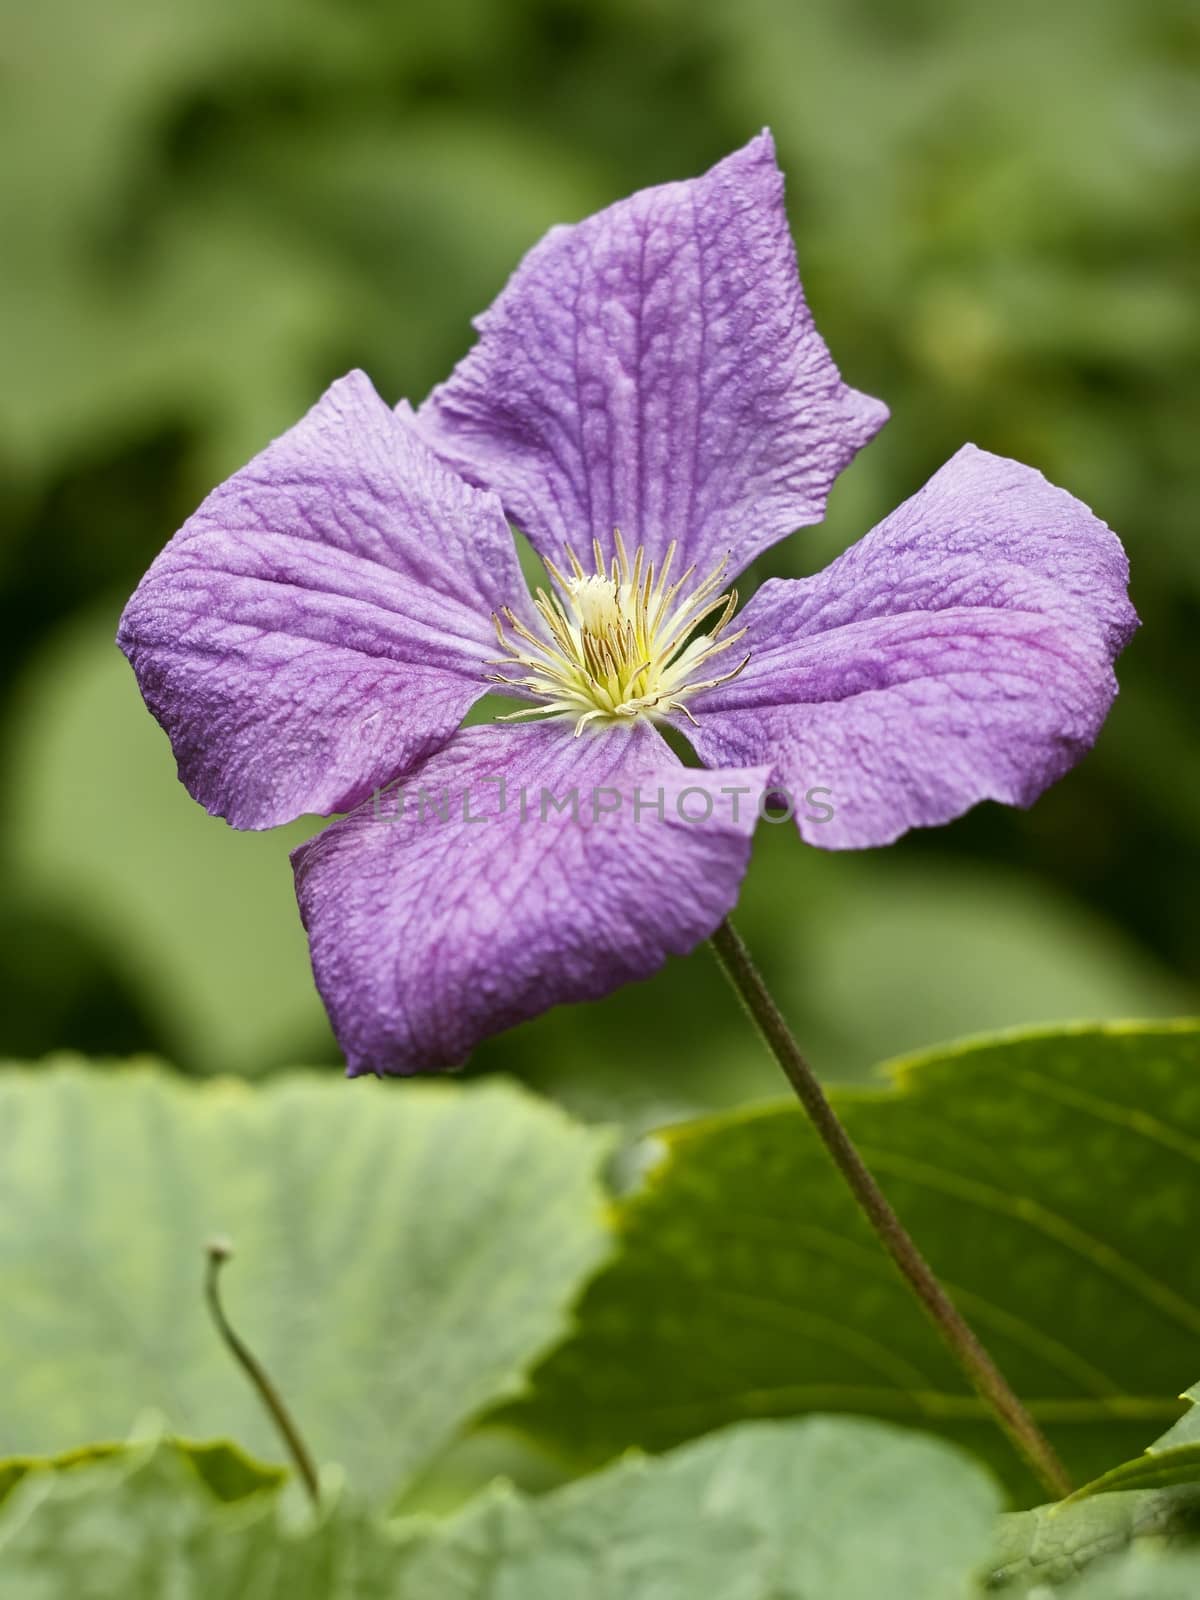 Clematis flower close up by qiiip